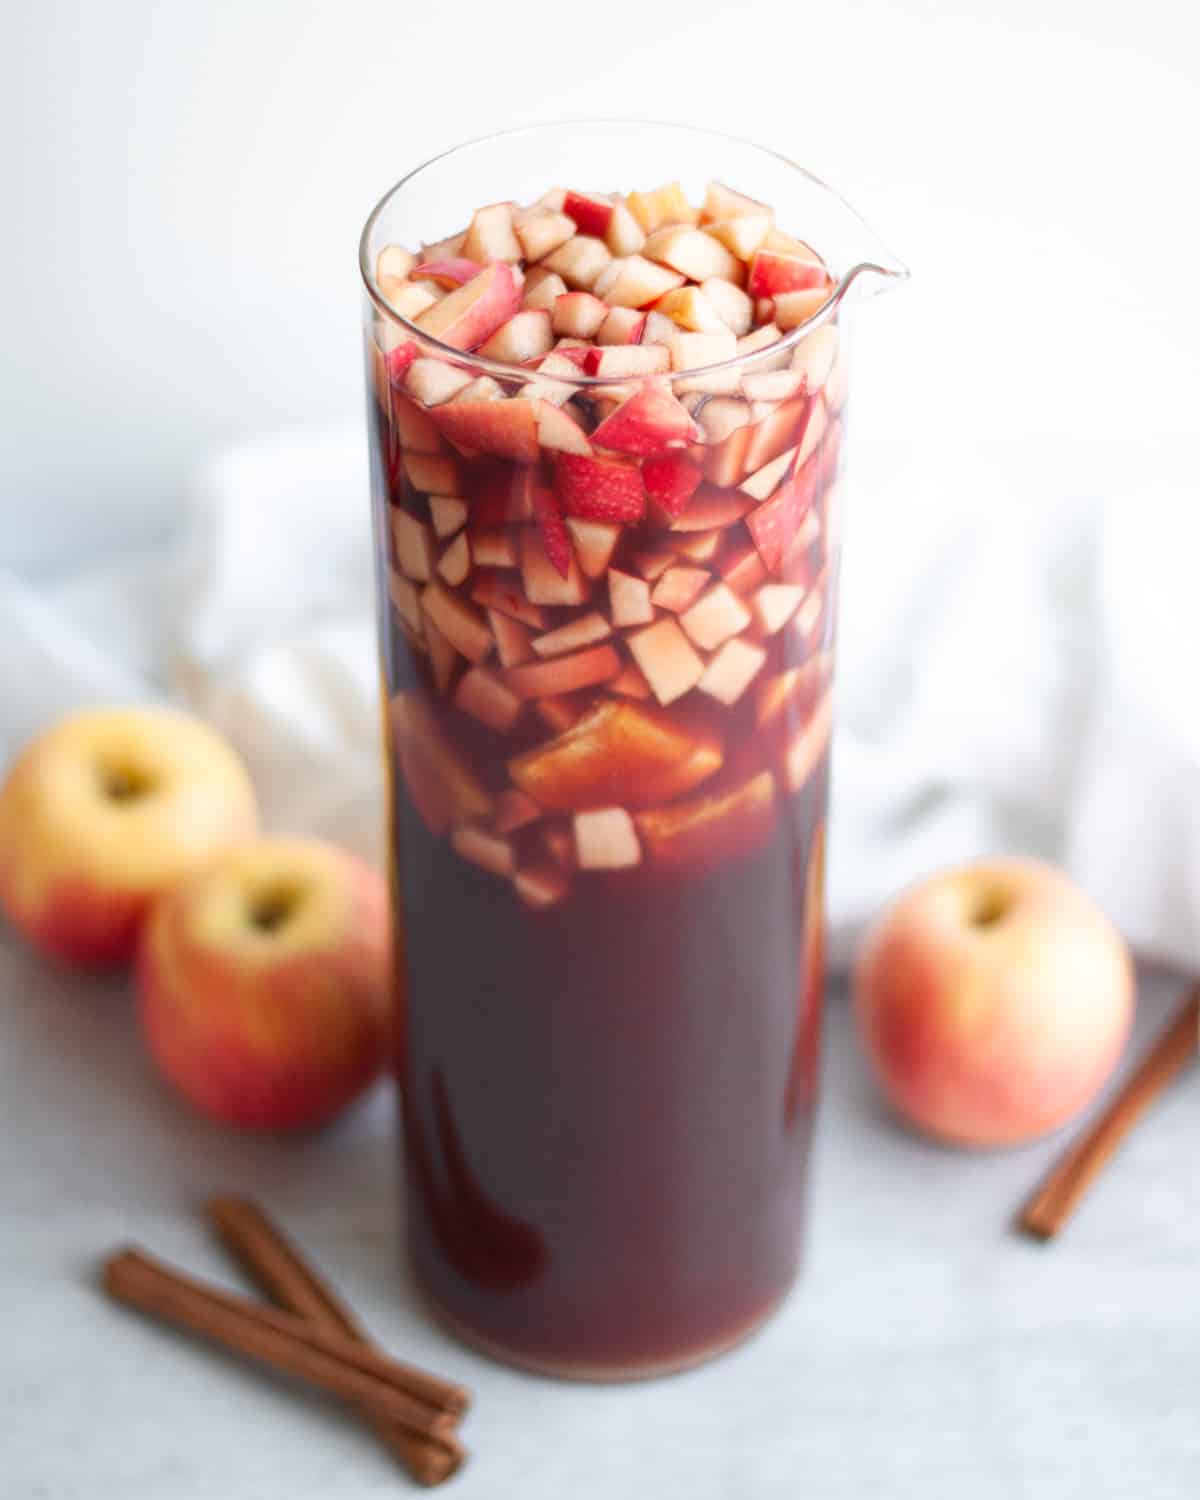 Tall glass pitcher of fall red wine sangria. A white linen, apples, and cinnamon sticks sit around the pitcher.